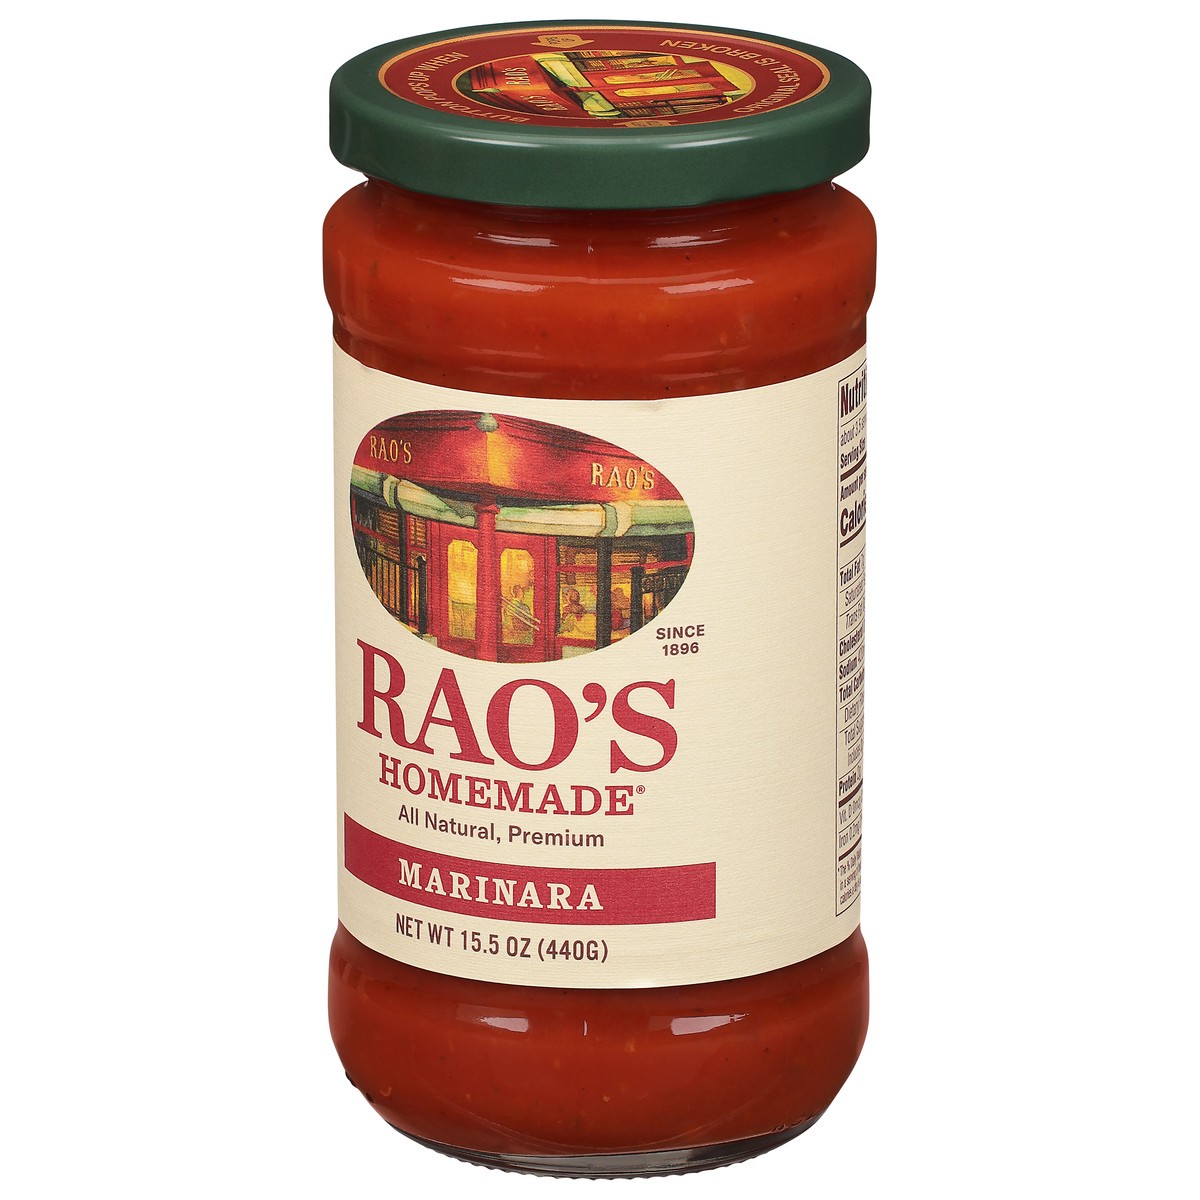 slide 6 of 9, Rao's Homemade Marinara Sauce | 15.5 oz | All Purpose Tomato Sauce | Pasta Sauce | No Sugar Added, Carb Conscious, Keto Friendly | All Natural, Premium Quality | With Italian Tomatoes & Olive Oil, 15.5 oz